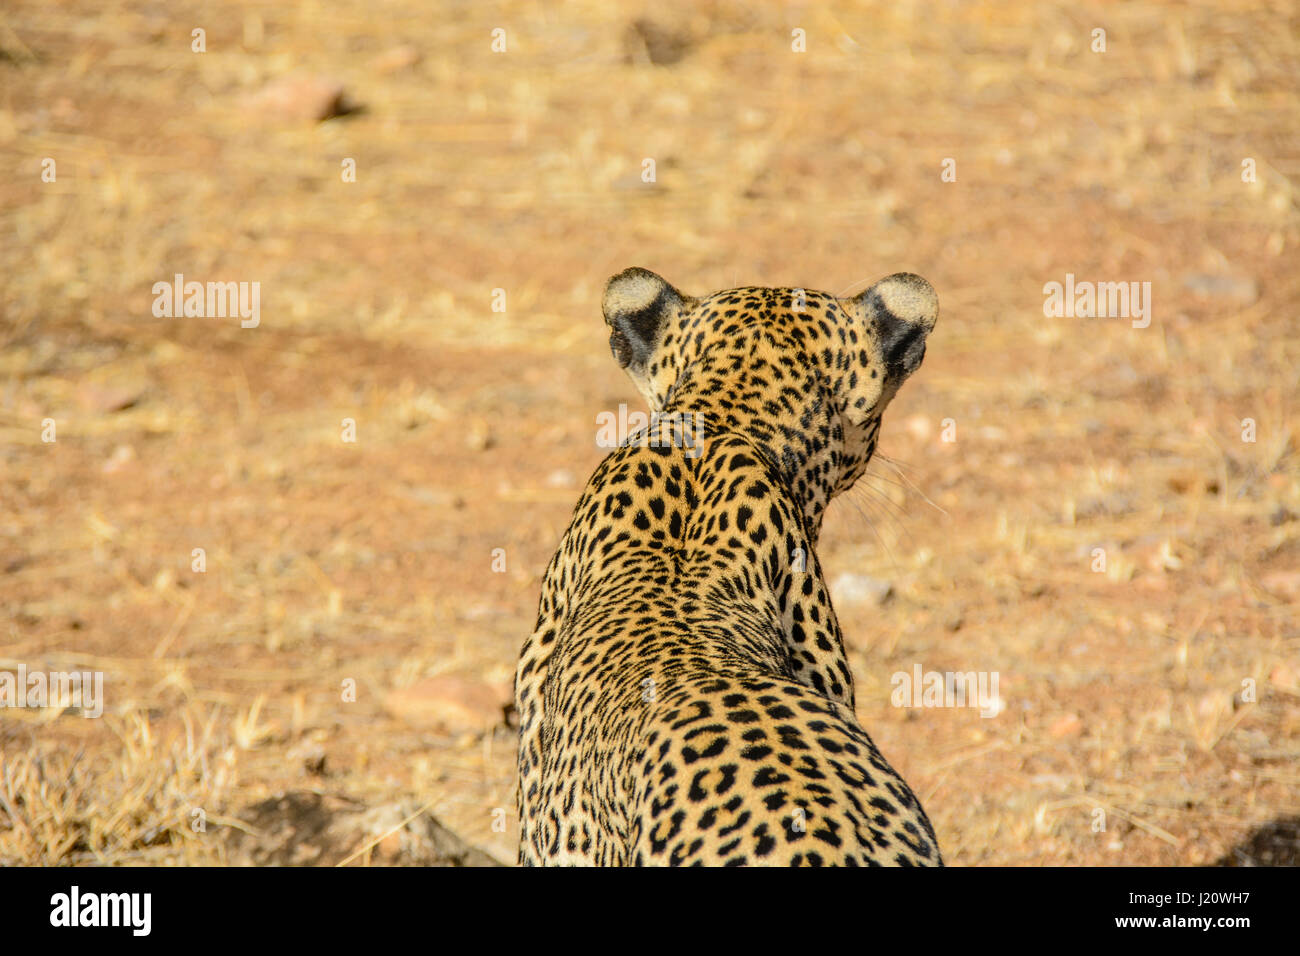 Rear view from above of a solitary wild African Leopard, Panthera pardus, at the Buffalo Springs Game Reserve, Kenya, East Africa, Stock Photo